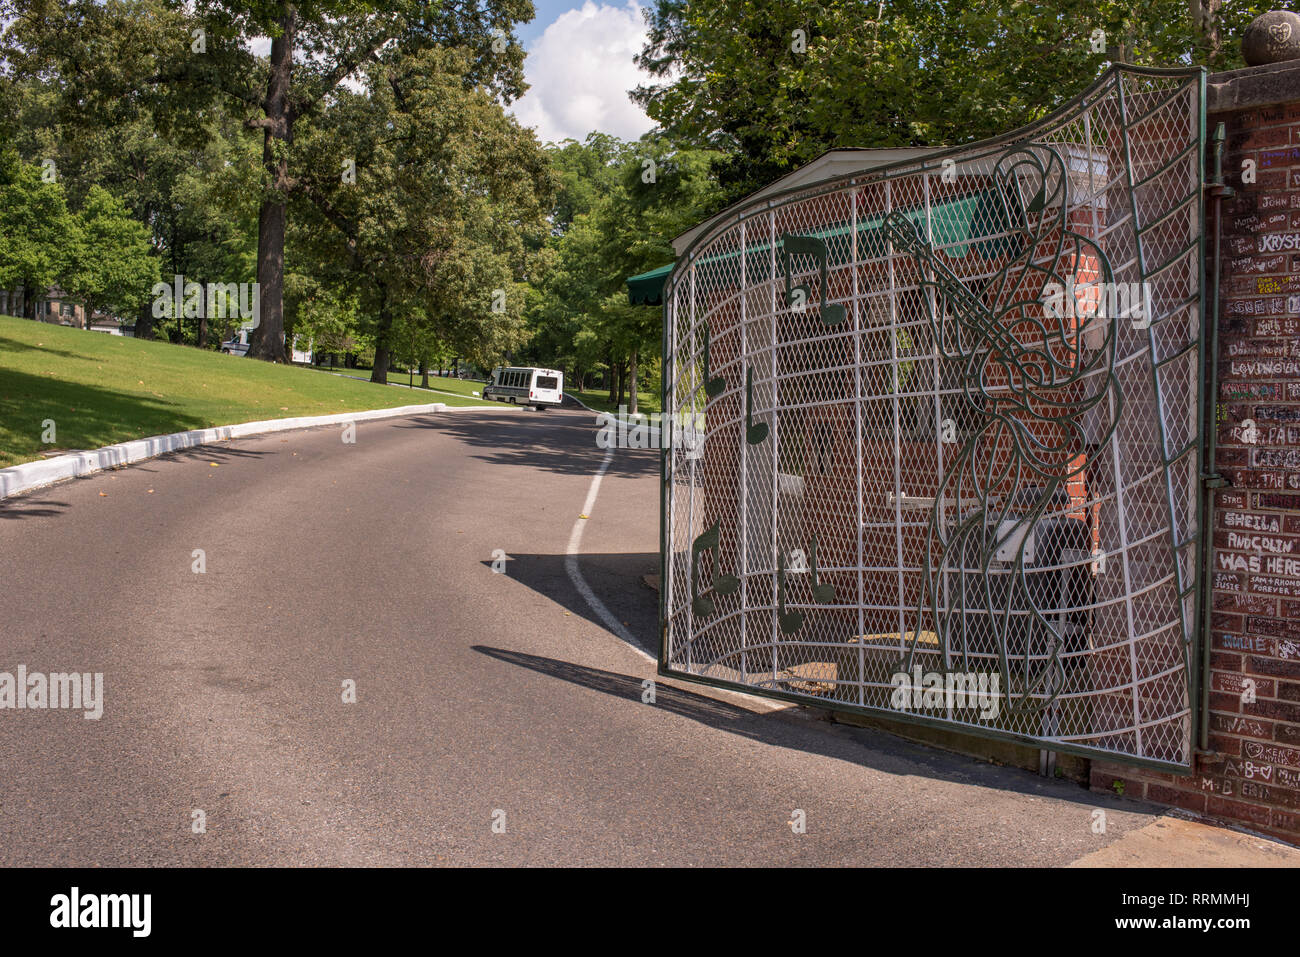 Scenes from the historic home of rock and roll icon, Elvis Presley: Graceland. Stock Photo